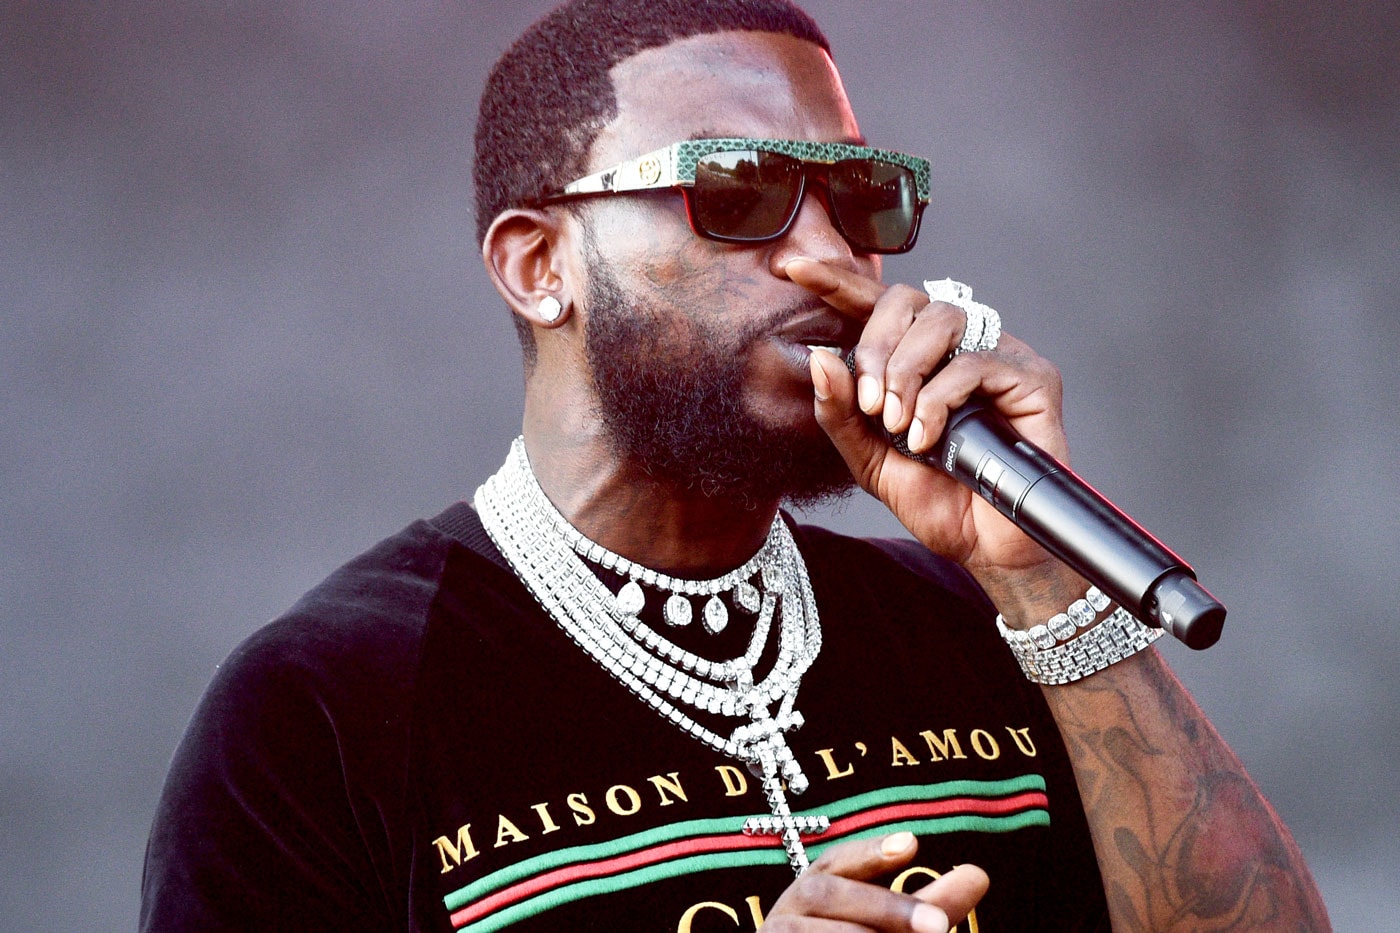 Gucci Mane Gets Jail Visit From 'Spring Breakers' Director Harmony Korine